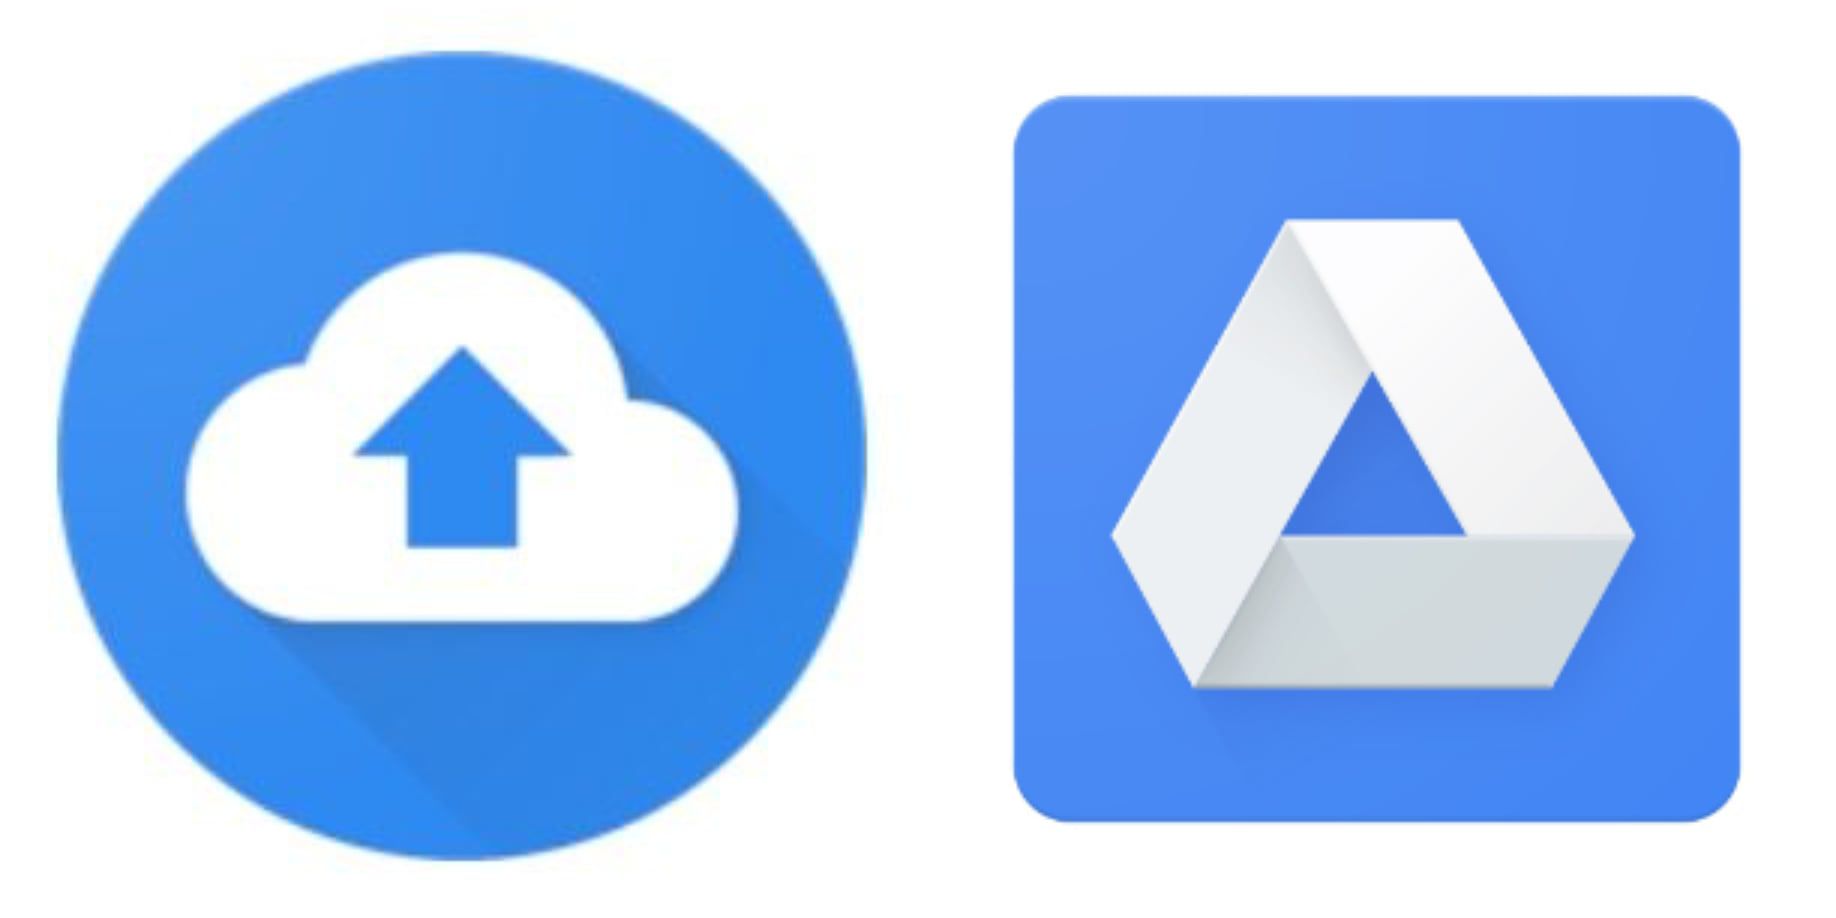 Google Drive App for Windows and Mac To Shut Down in March 2018